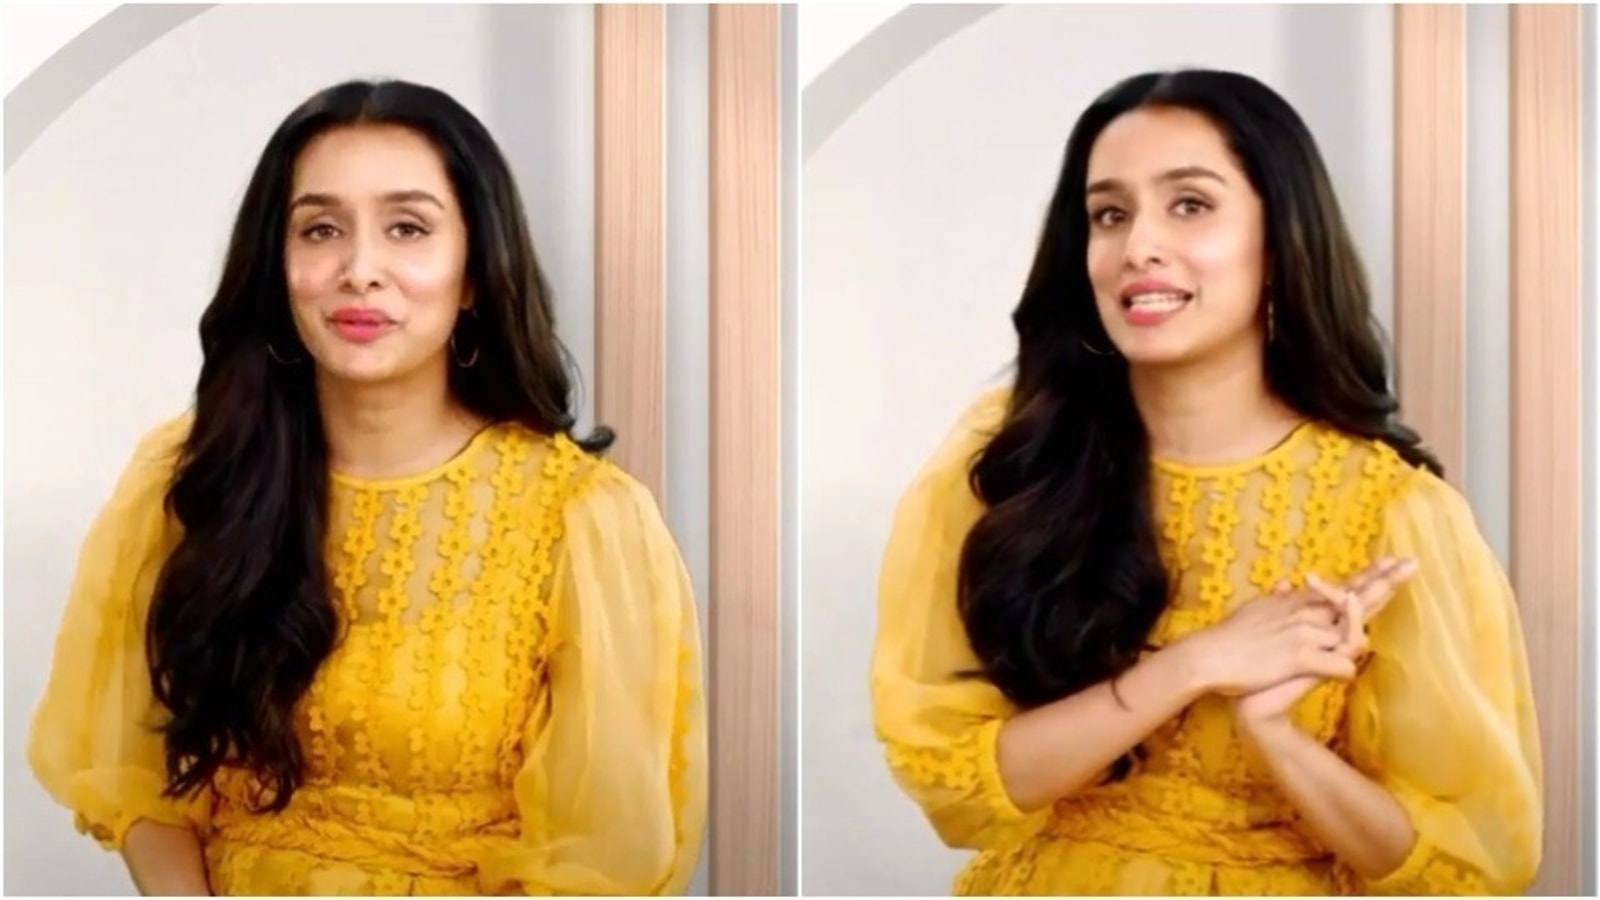 Shraddha Kapoor in â‚¹15.5k yellow midi dress is as graceful as it gets |  Fashion Trends - Hindustan Times